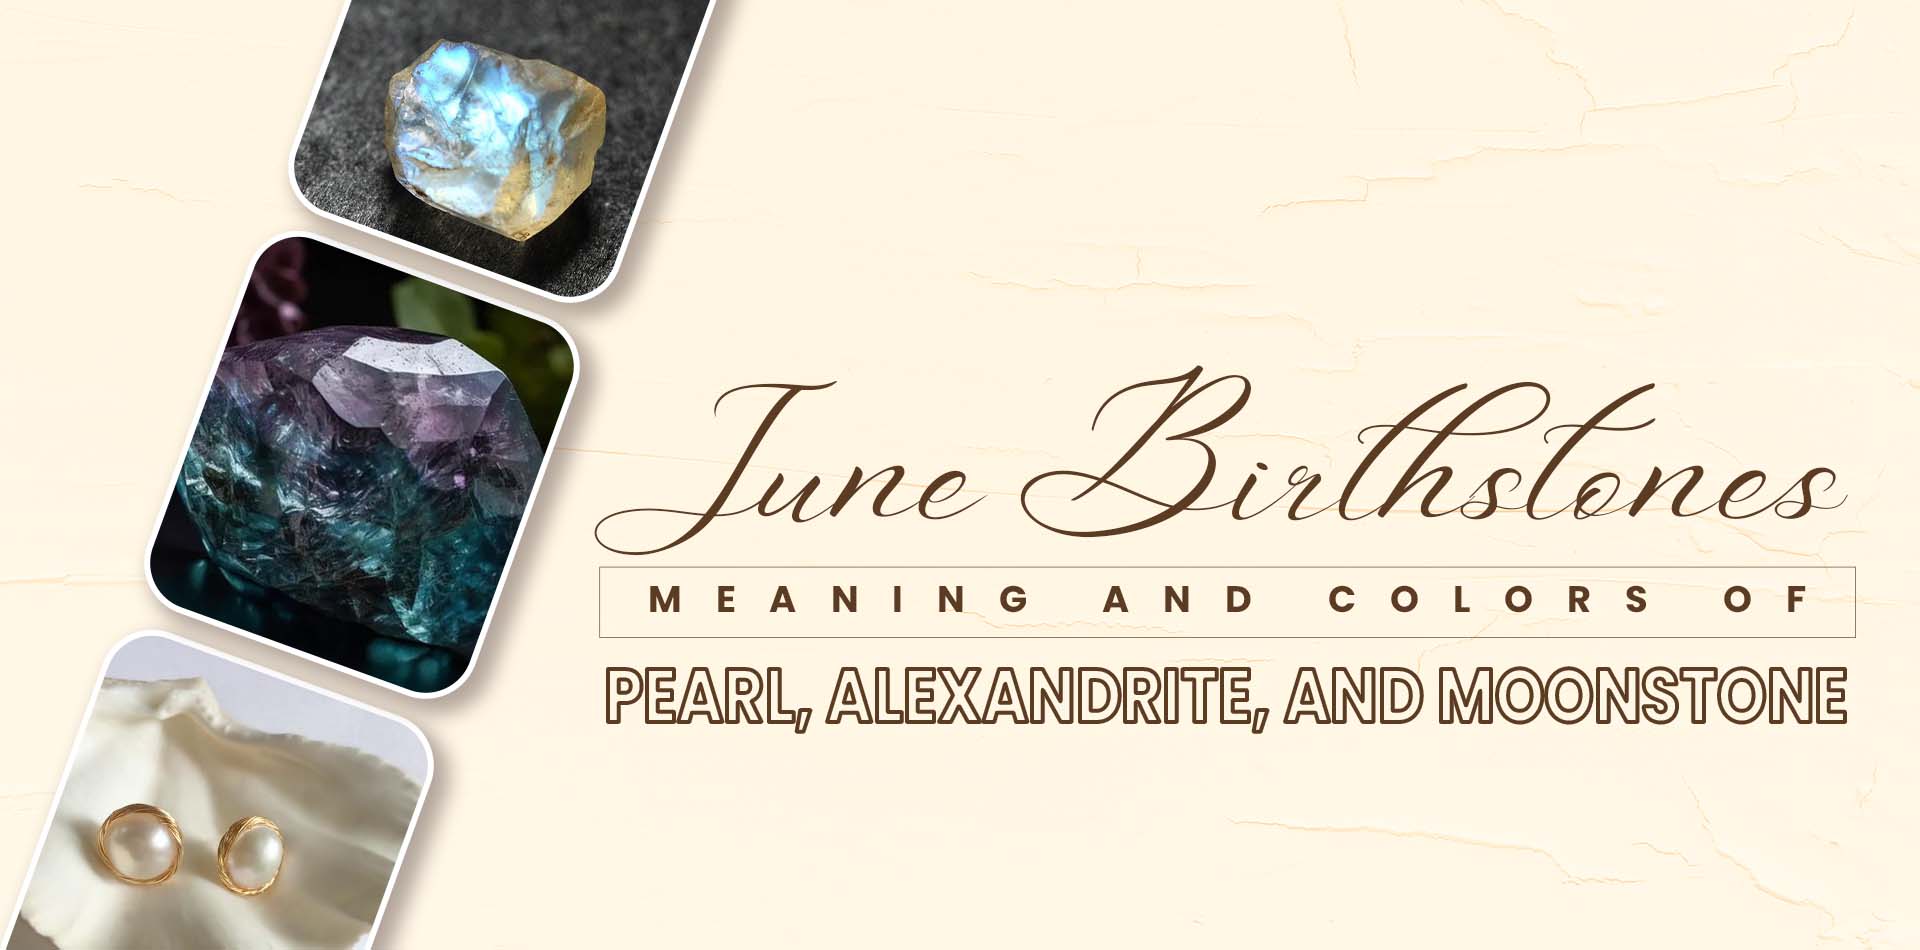 June Birthstones: Meaning and Colors of Pearl, Alexandrite, and Moonstone